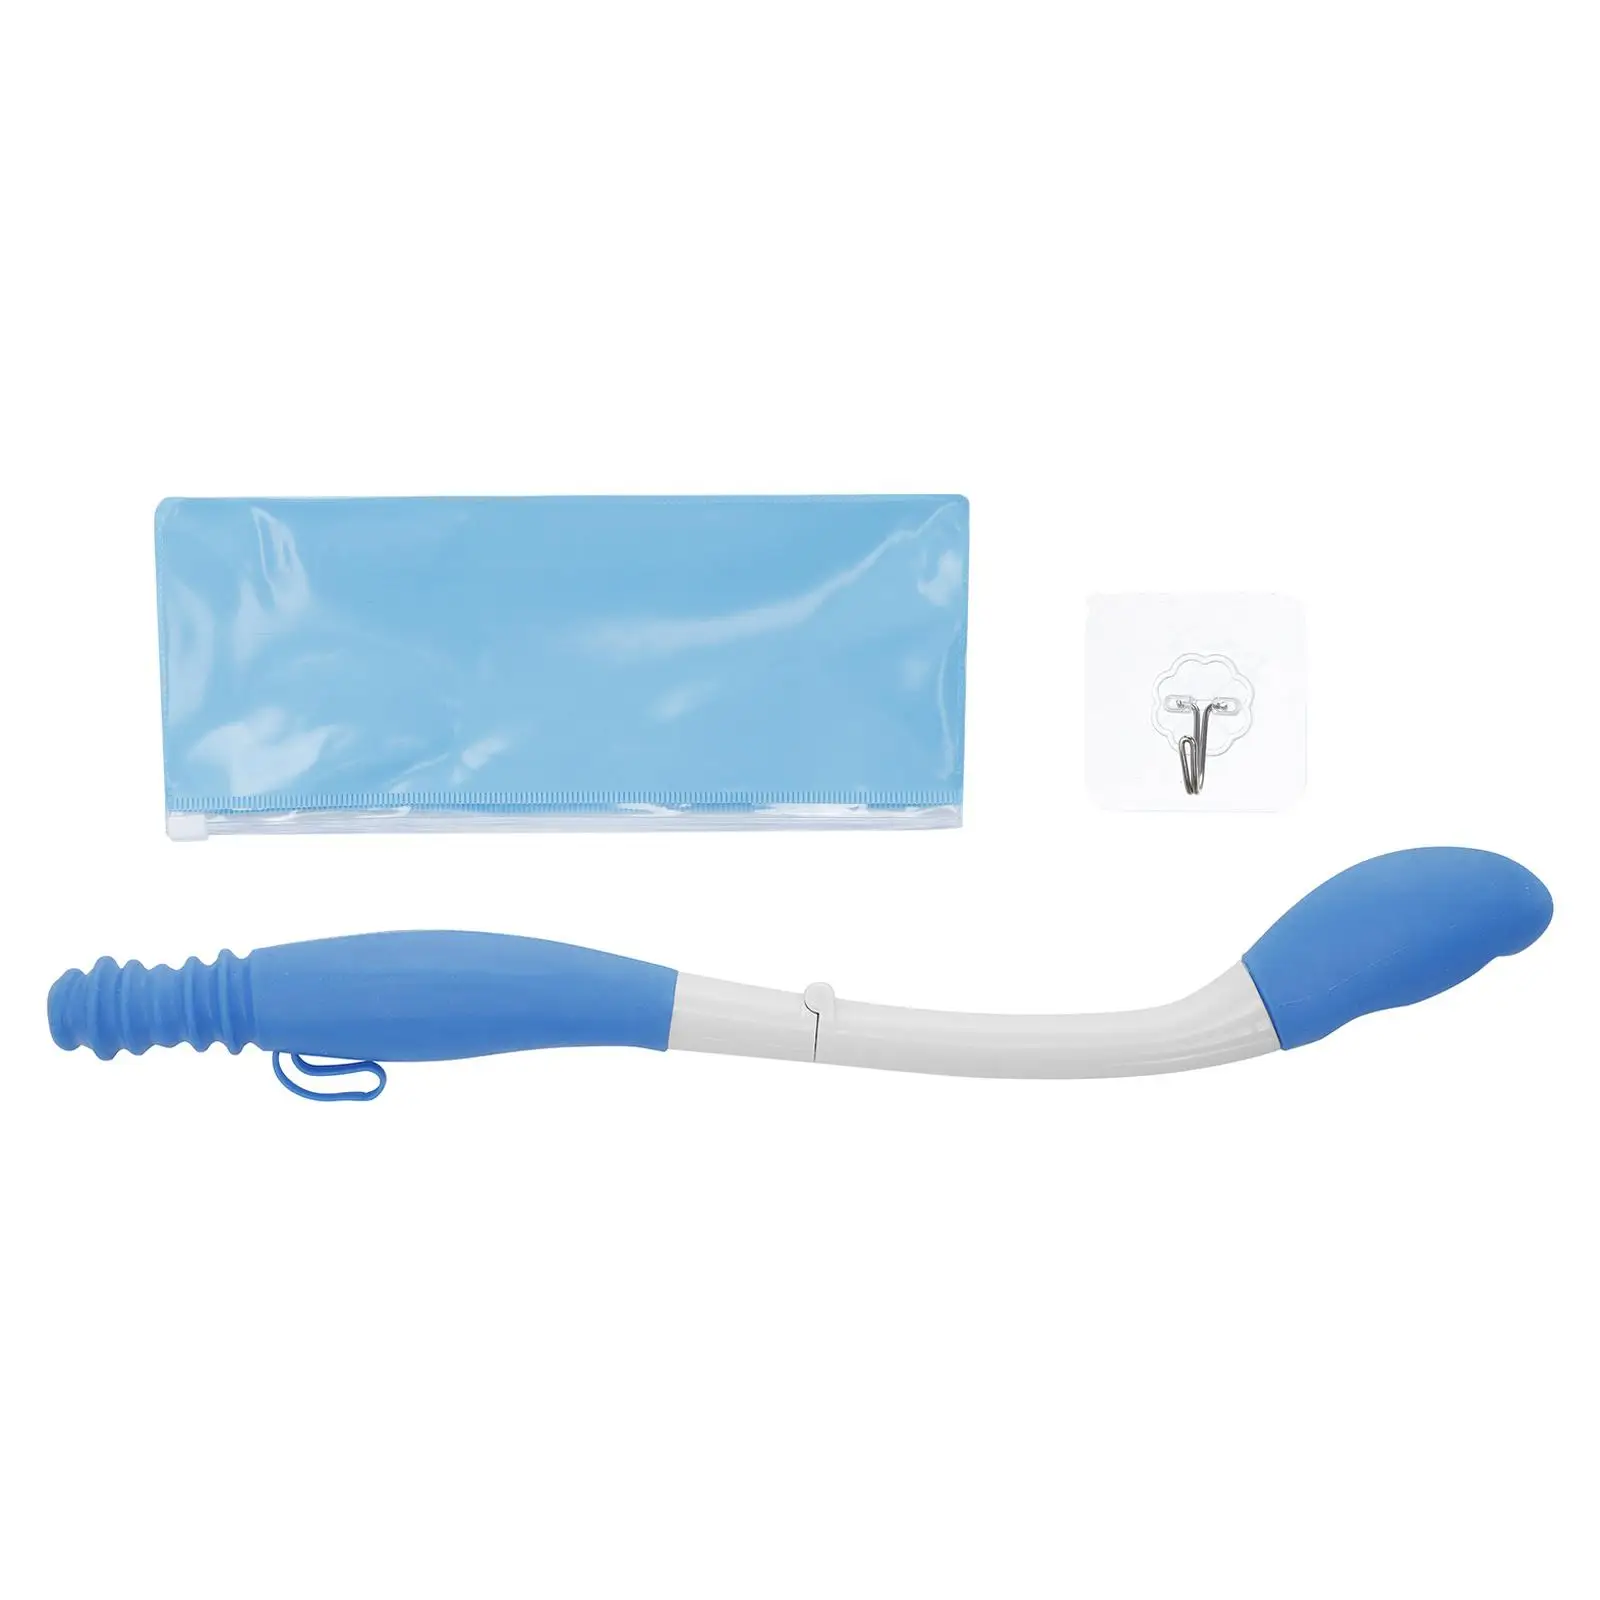 Toilet Aid Wiper Comfort Wipe Wipe Assist for Disabled Daily Living Bathroom